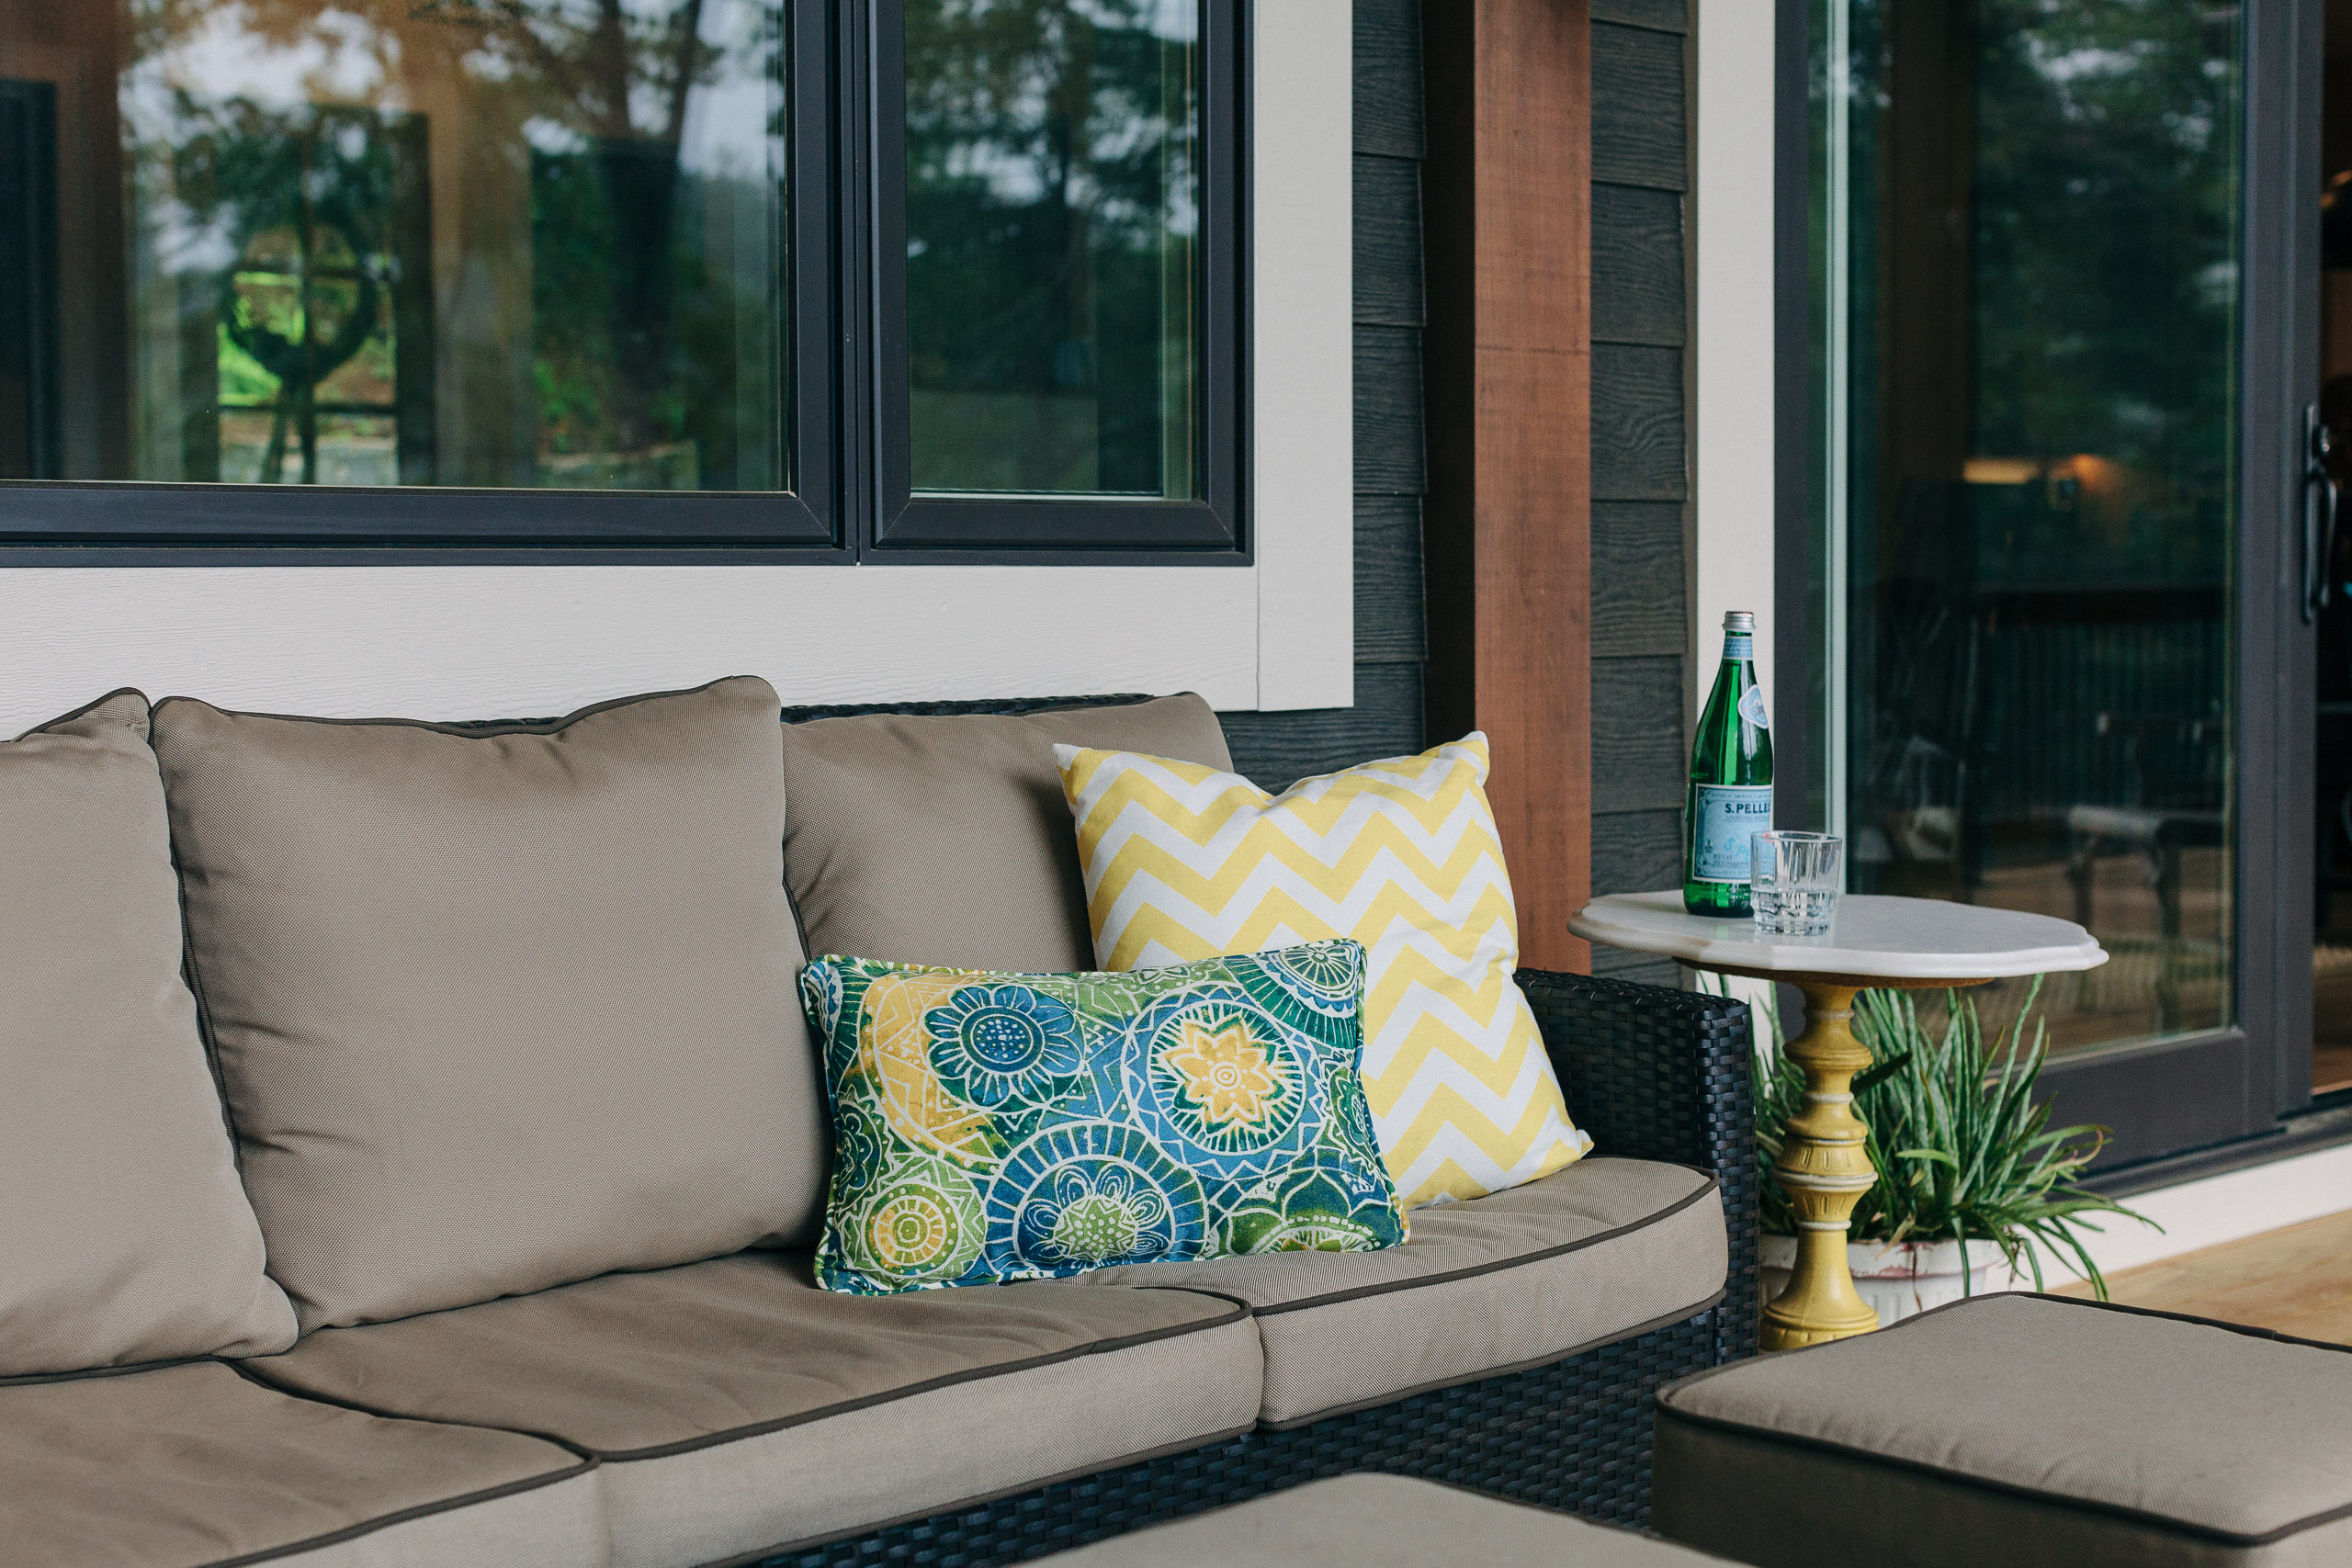 outdoor upholstery, pillows